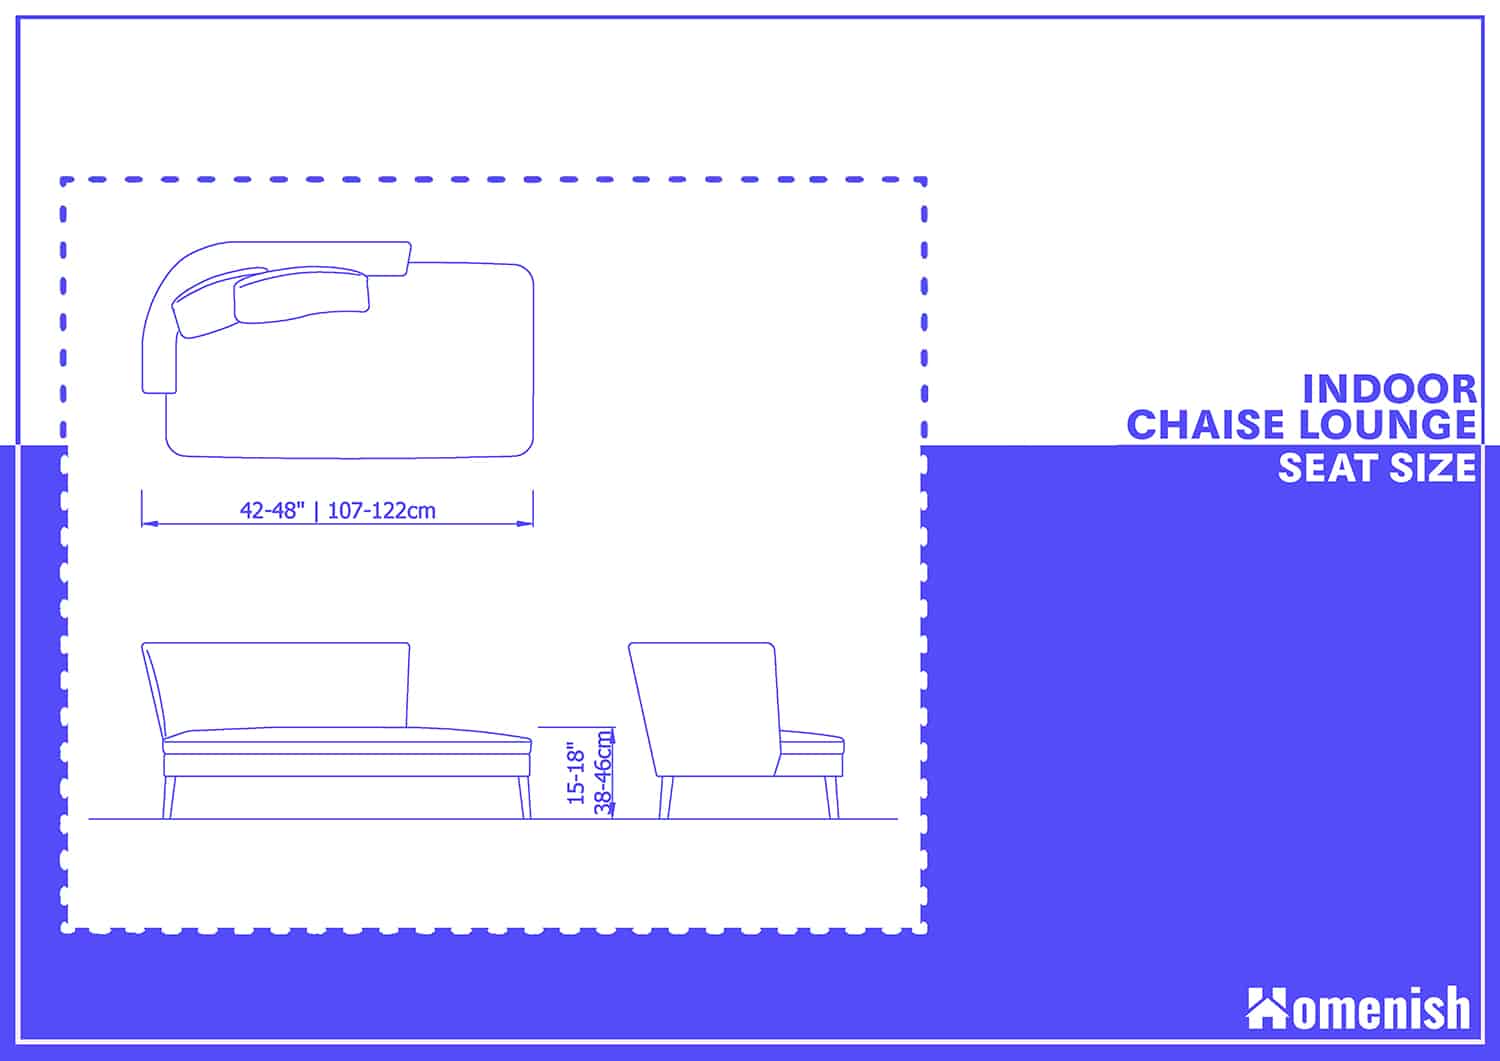 Indoor Chaise Lounge Seat Size